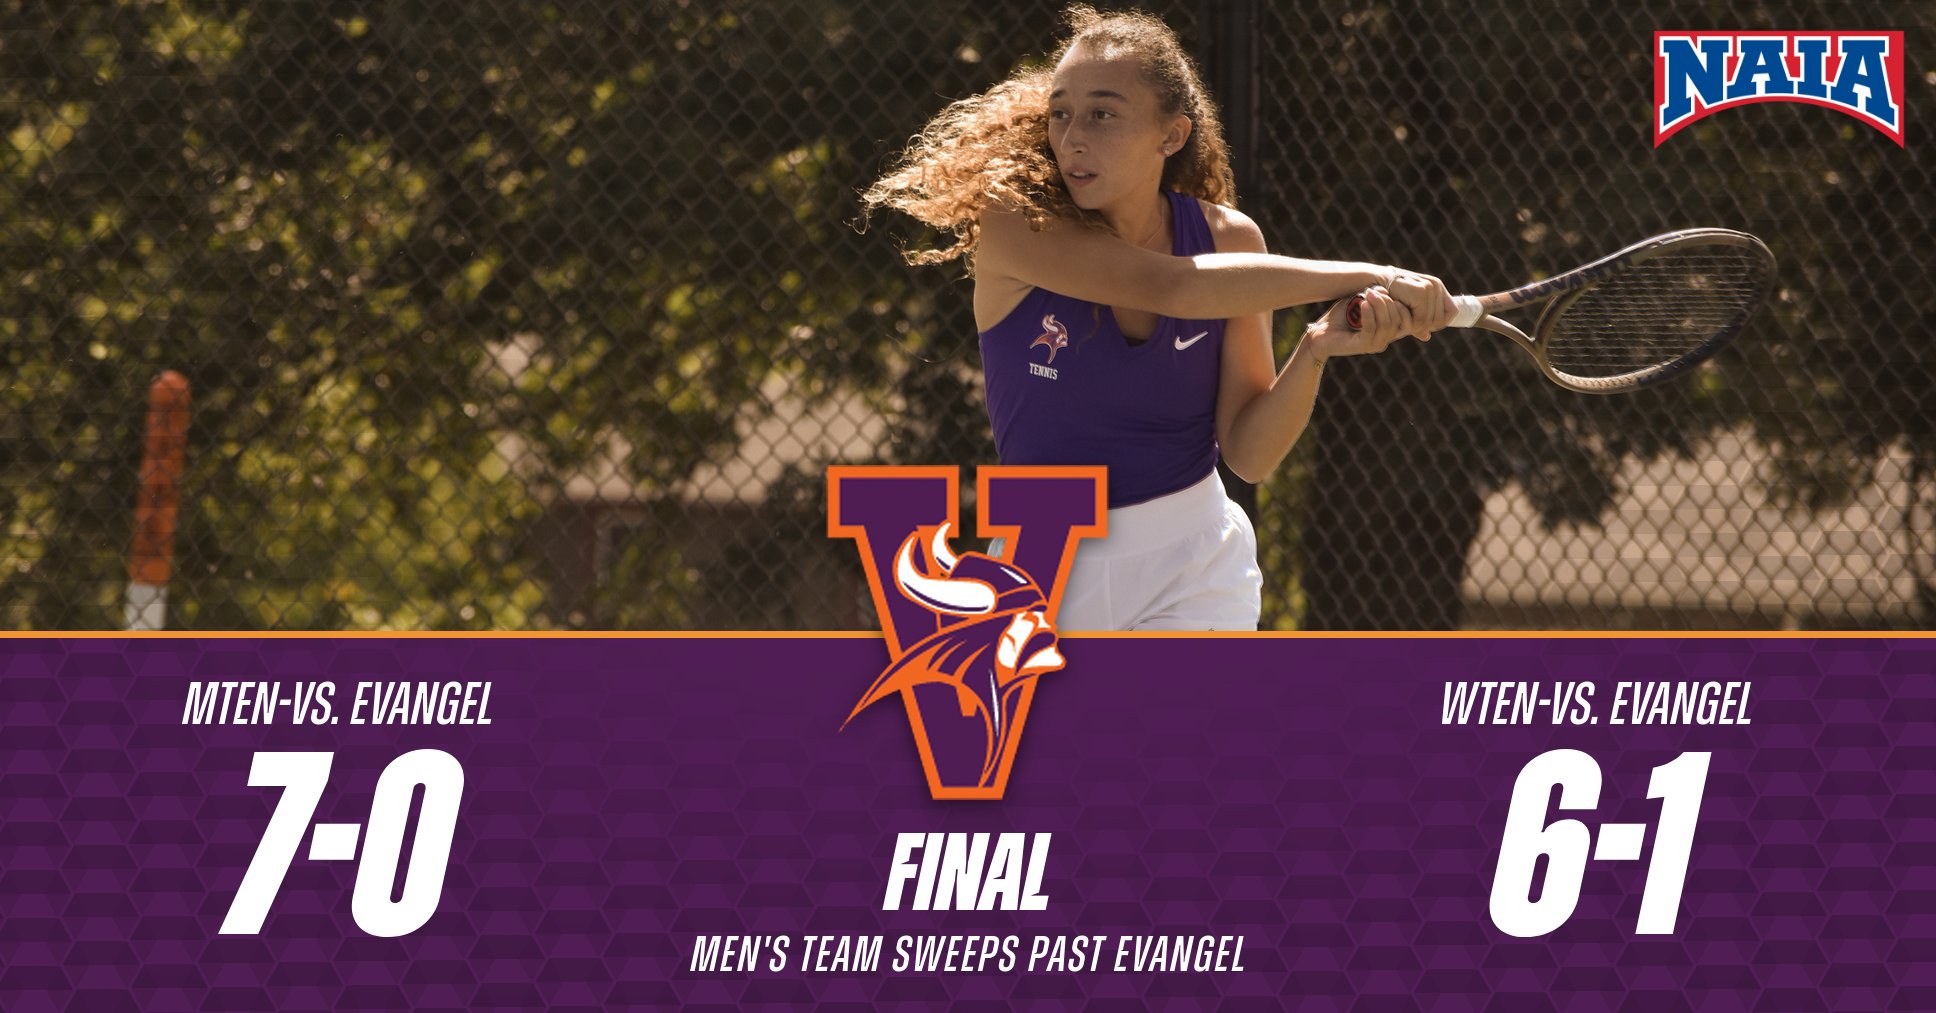 Tennis Teams defeat Evangel at home in Saturday Matches